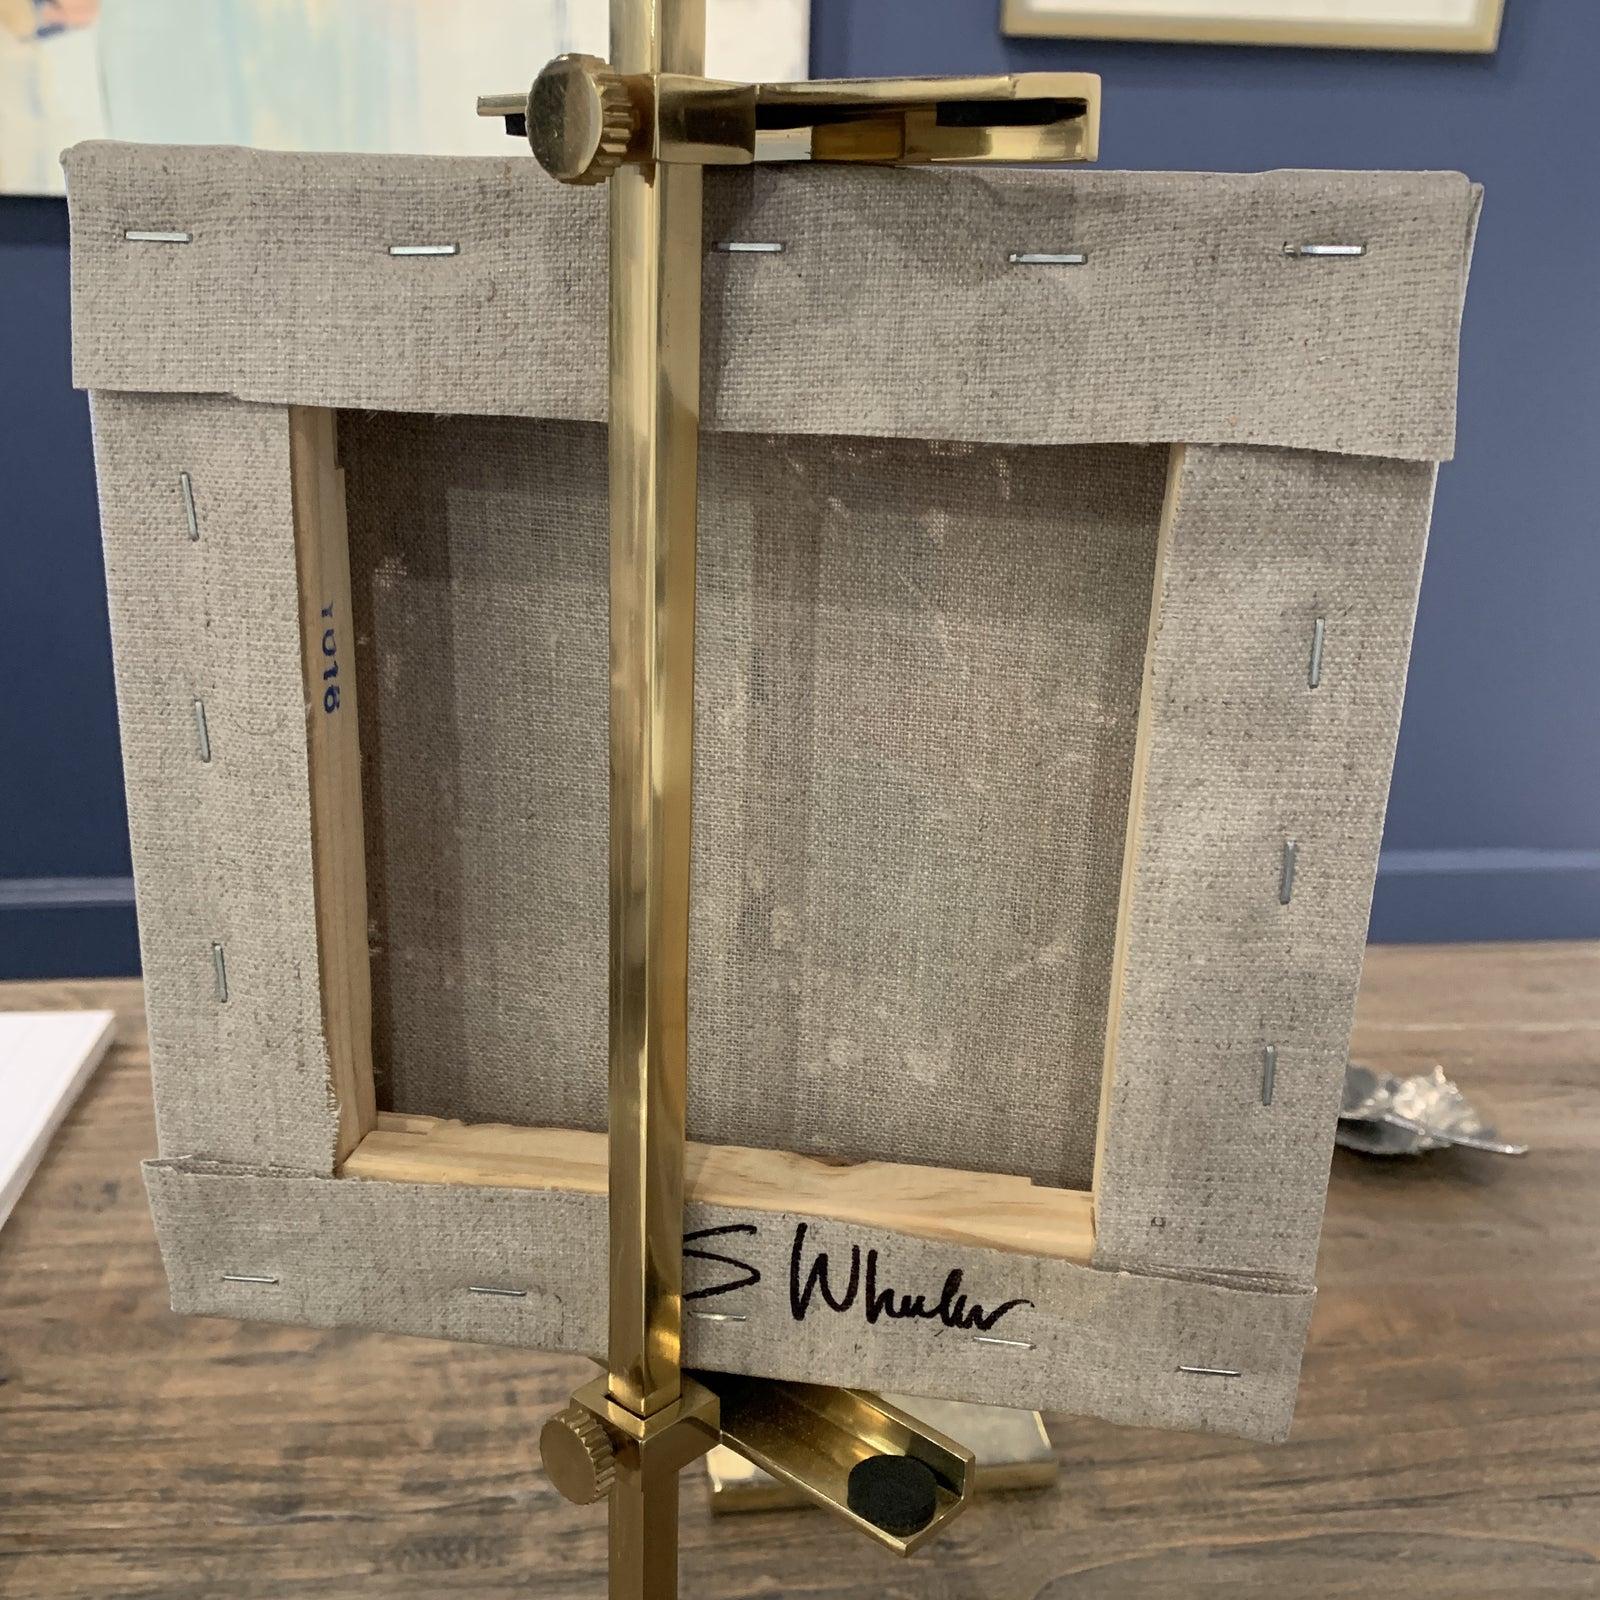 
Artist: Stephanie Wheeler
Abstract on Linen with Gold Brass Easel
The art itself is 8 x 8 - Signed on the reverse - each one comes with adjustable brass stand easel or you can frame the mini oil on your own. The brass easel serves many